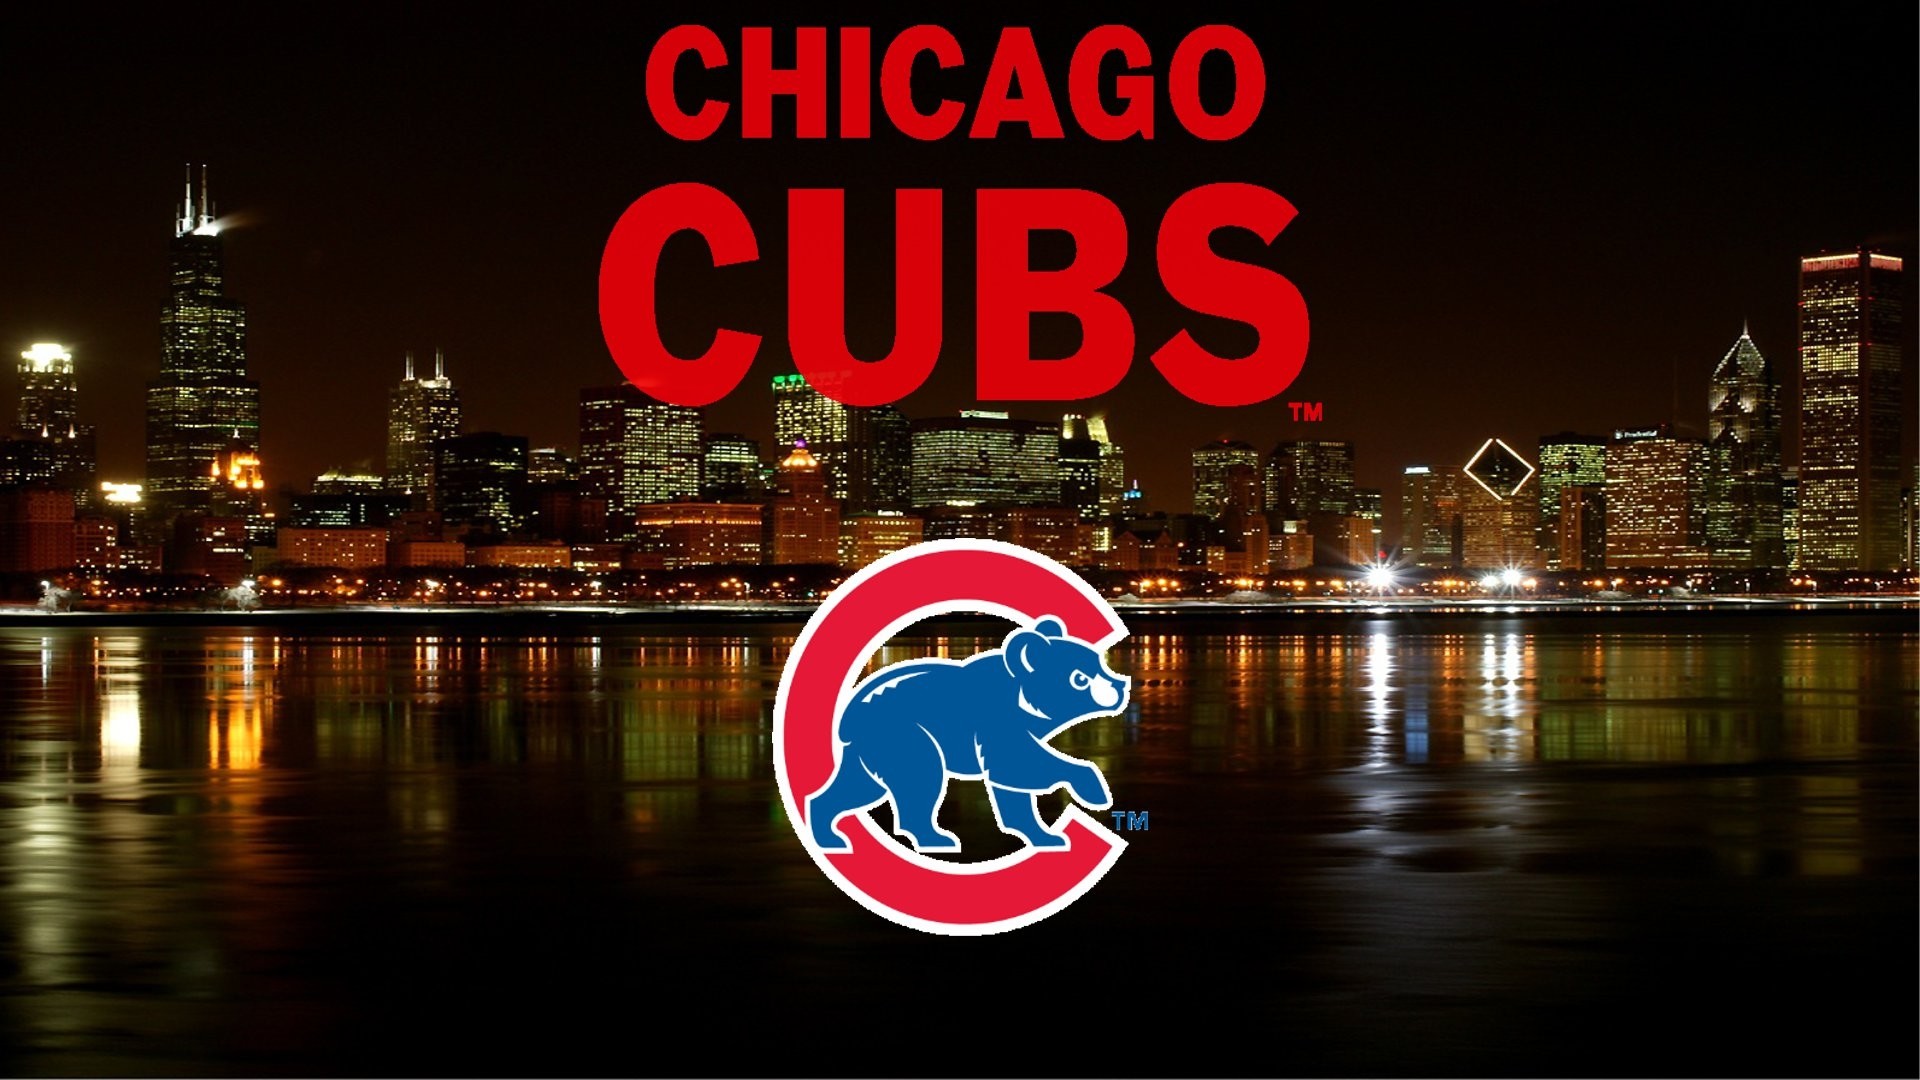 1920x1080 ... chicago cubs wallpaper for android wallpapersafari ...